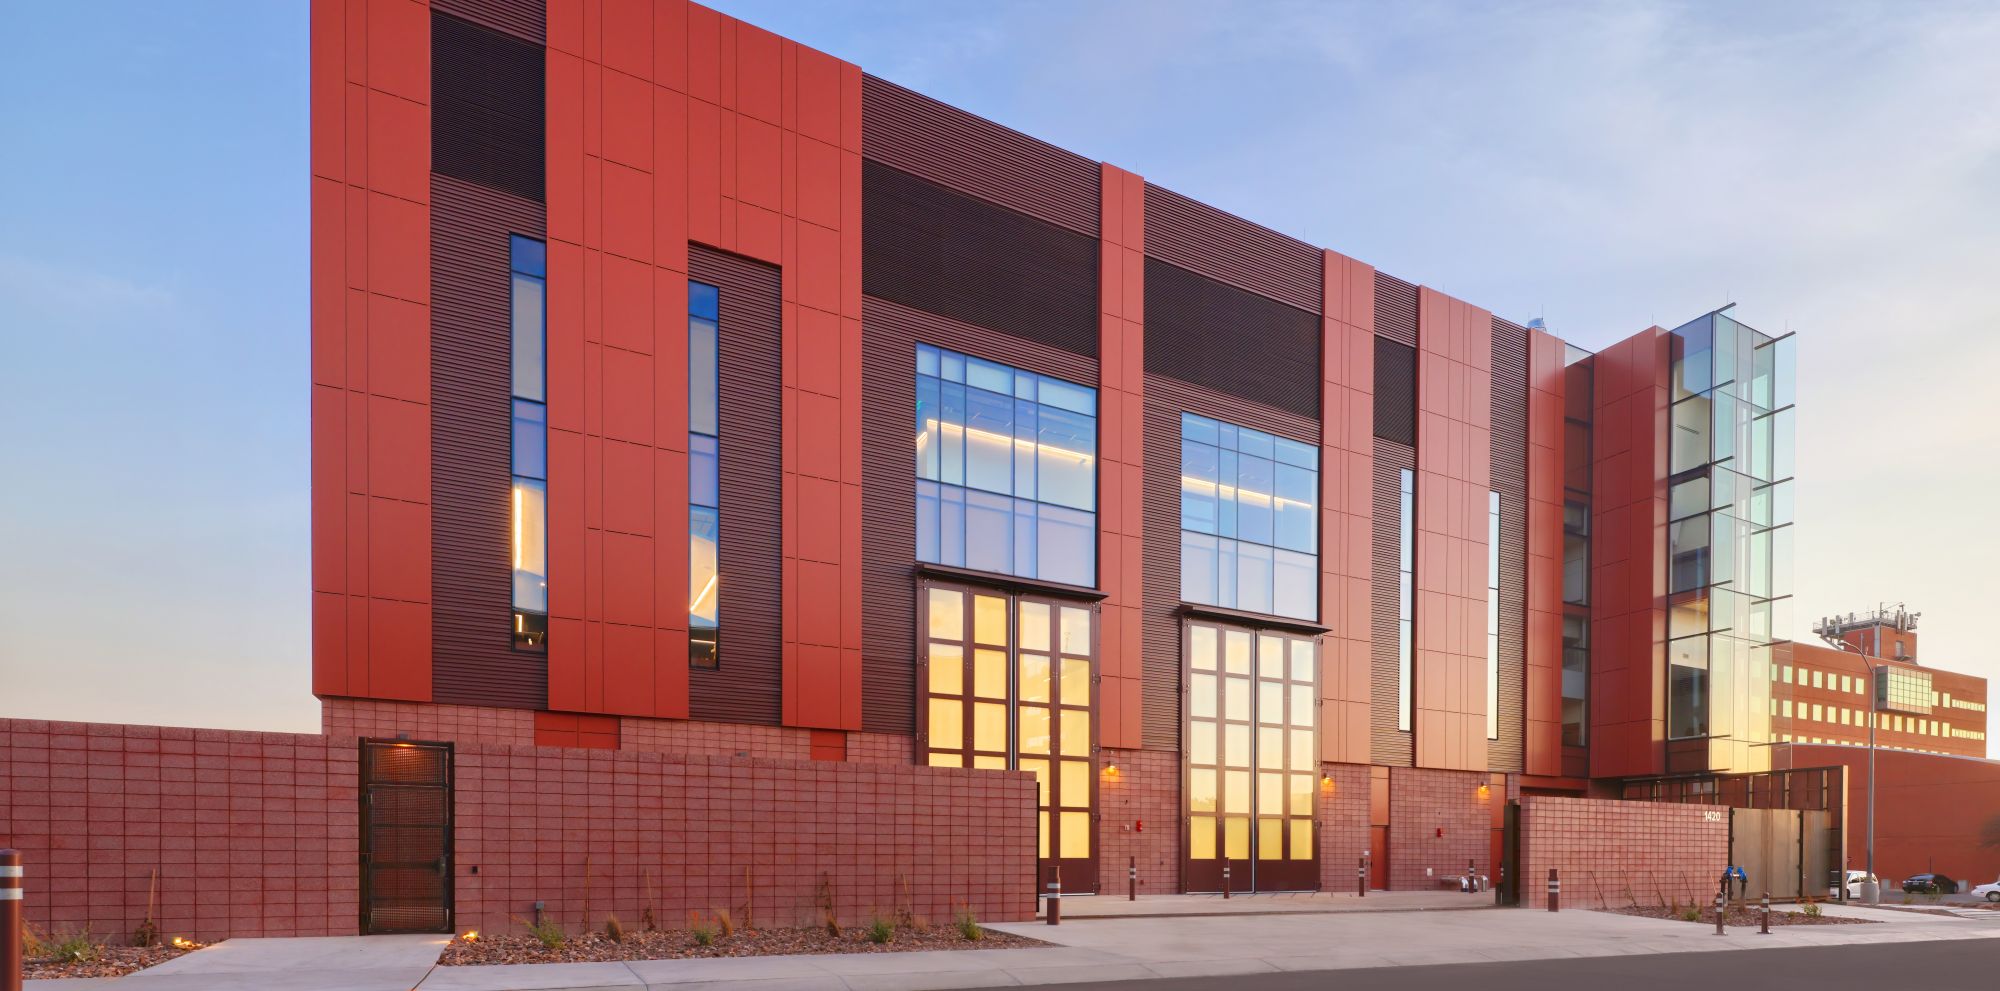 The University of Arizona Applied Research Building at dusk